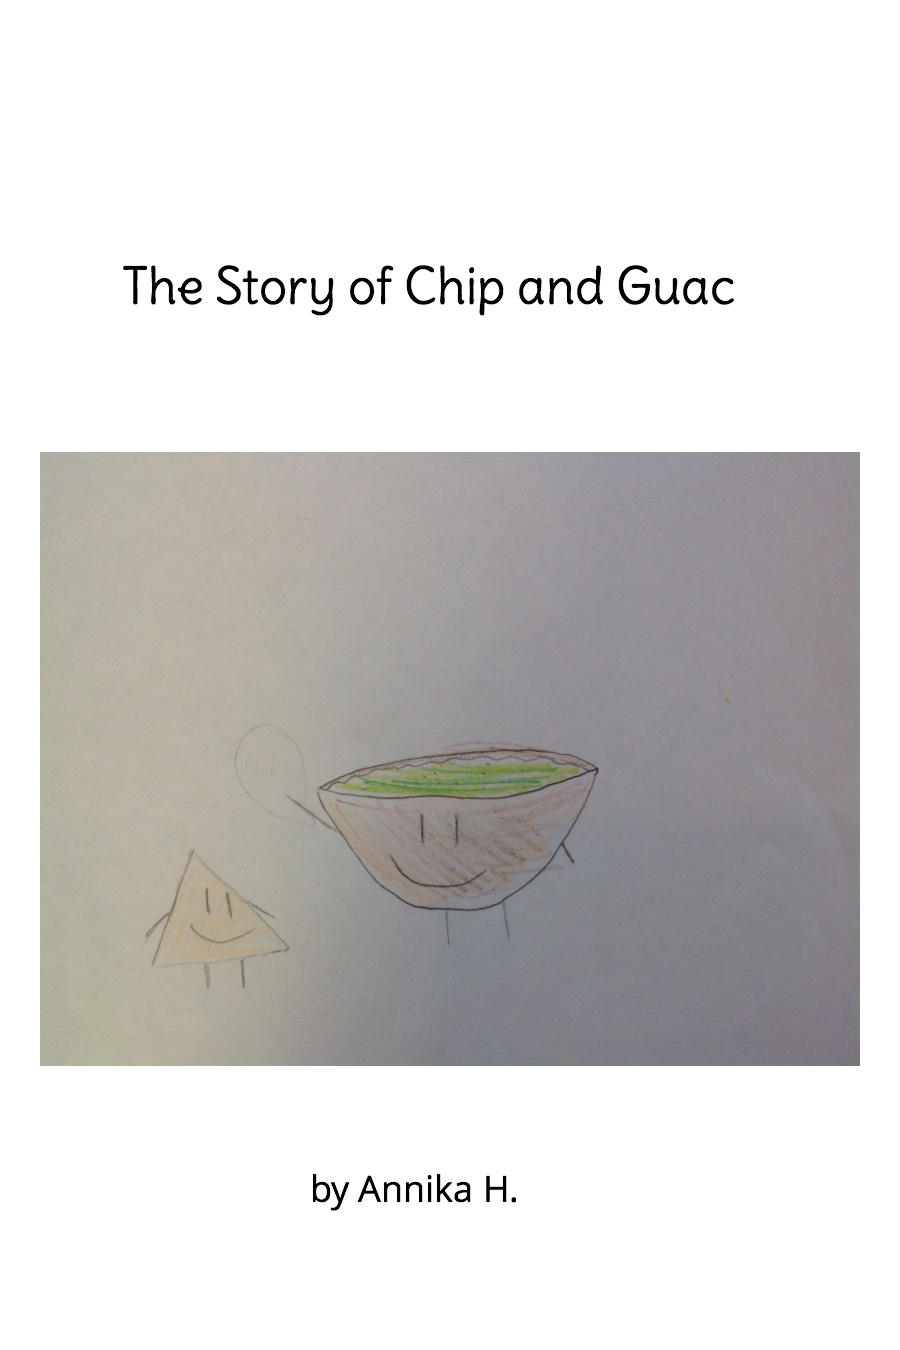 The Story of Chip and Guac by Annika H